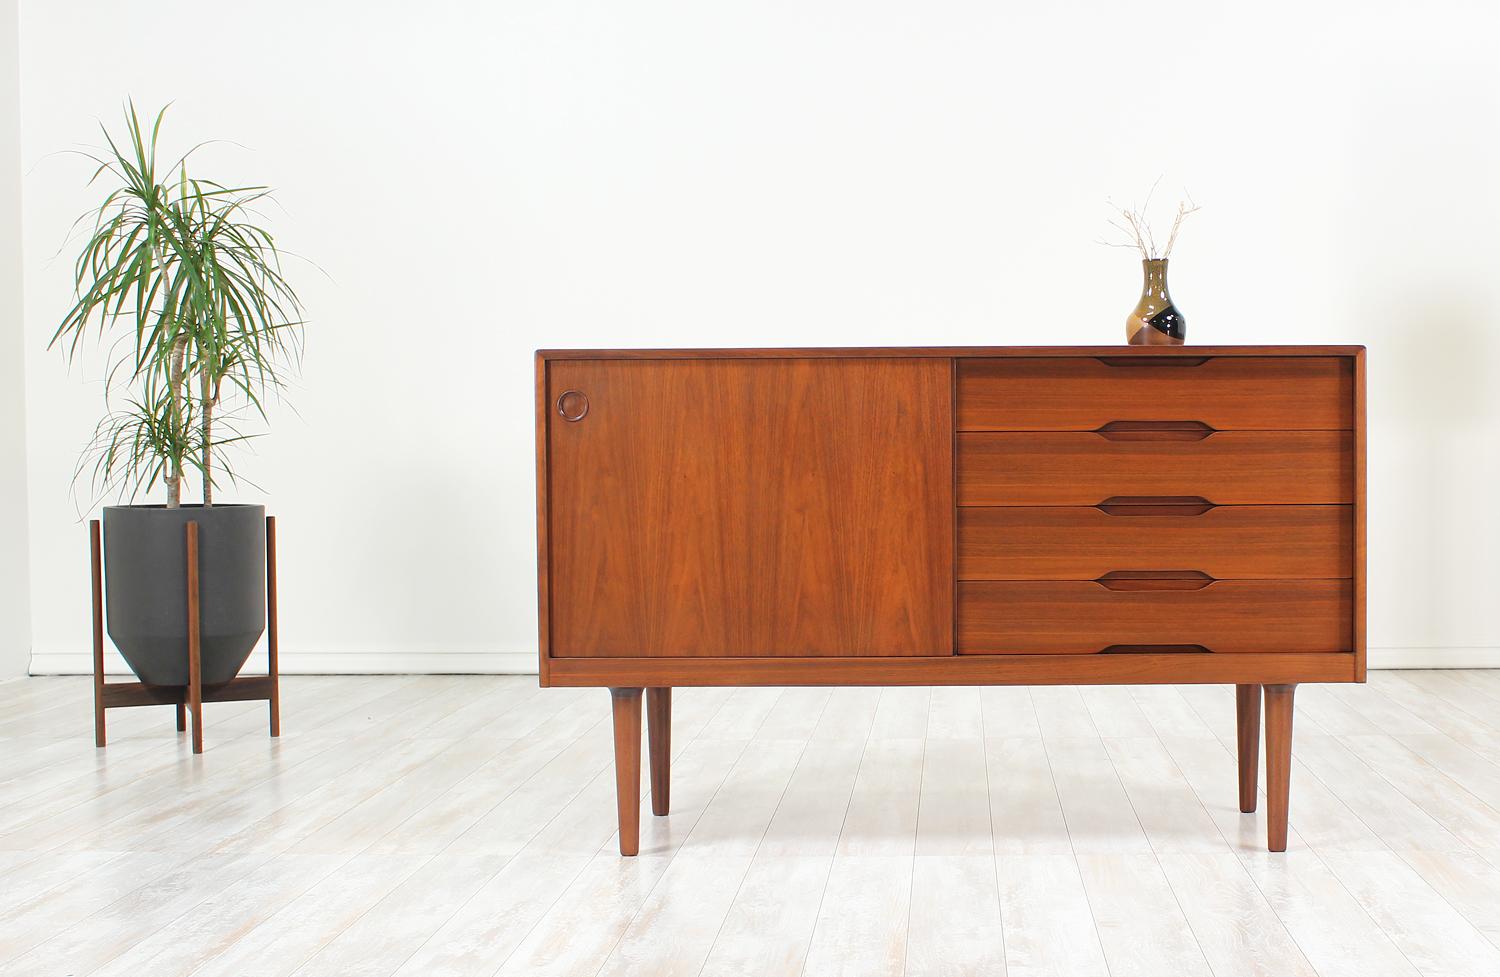 Beautiful credenza designed and manufactured by Gustav Bahus in Norway circa 1960. A versatile and elegant Scandinavian modern design that has been sturdily constructed in rich walnut wood to provide plentiful storage with organic contours and clean